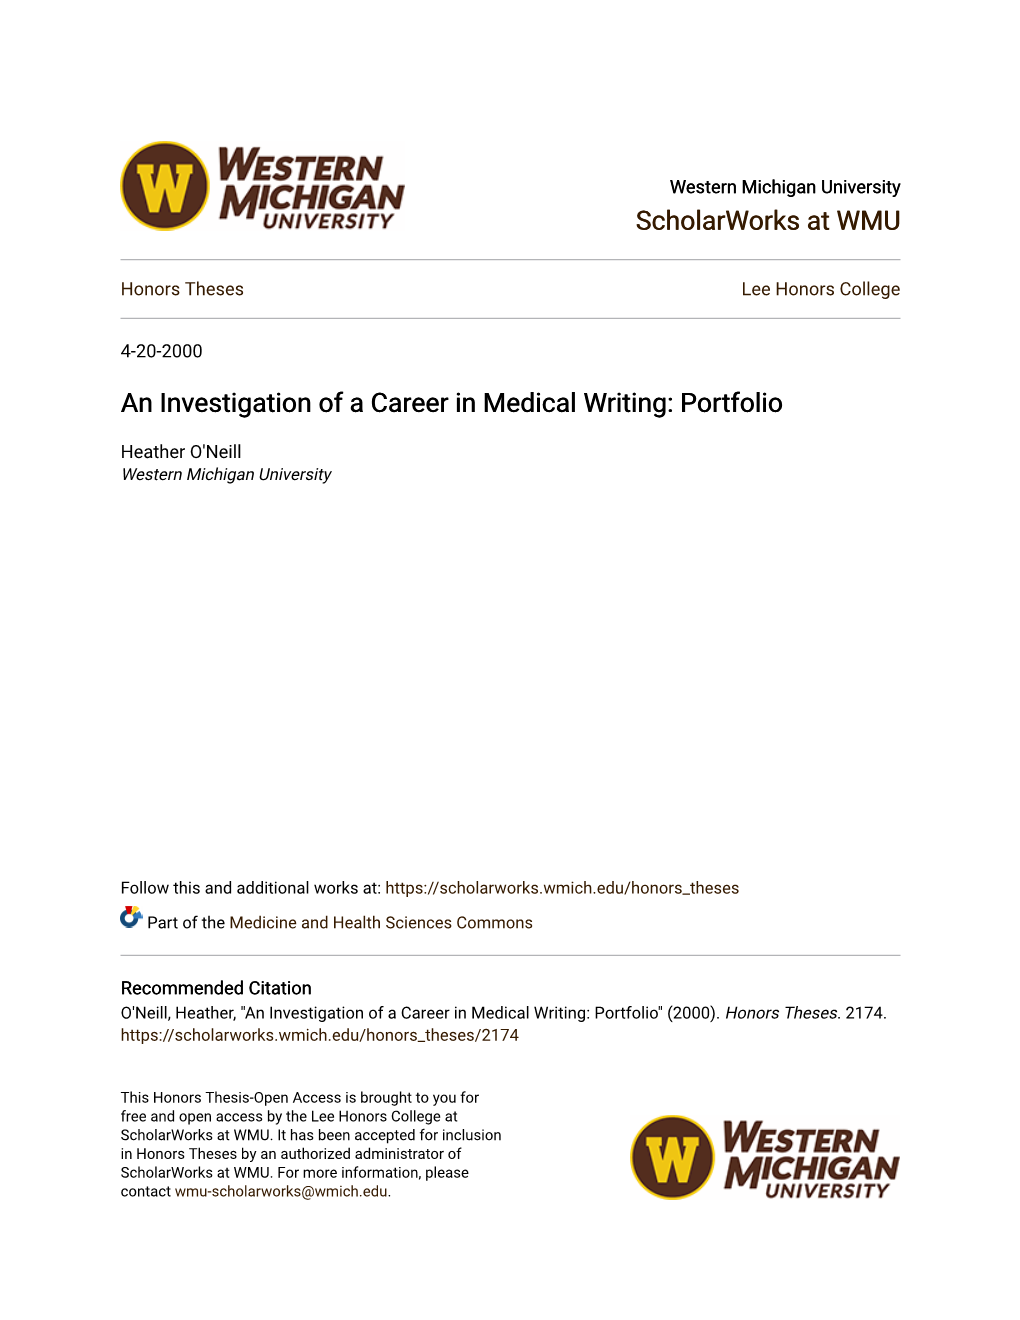 An Investigation of a Career in Medical Writing: Portfolio